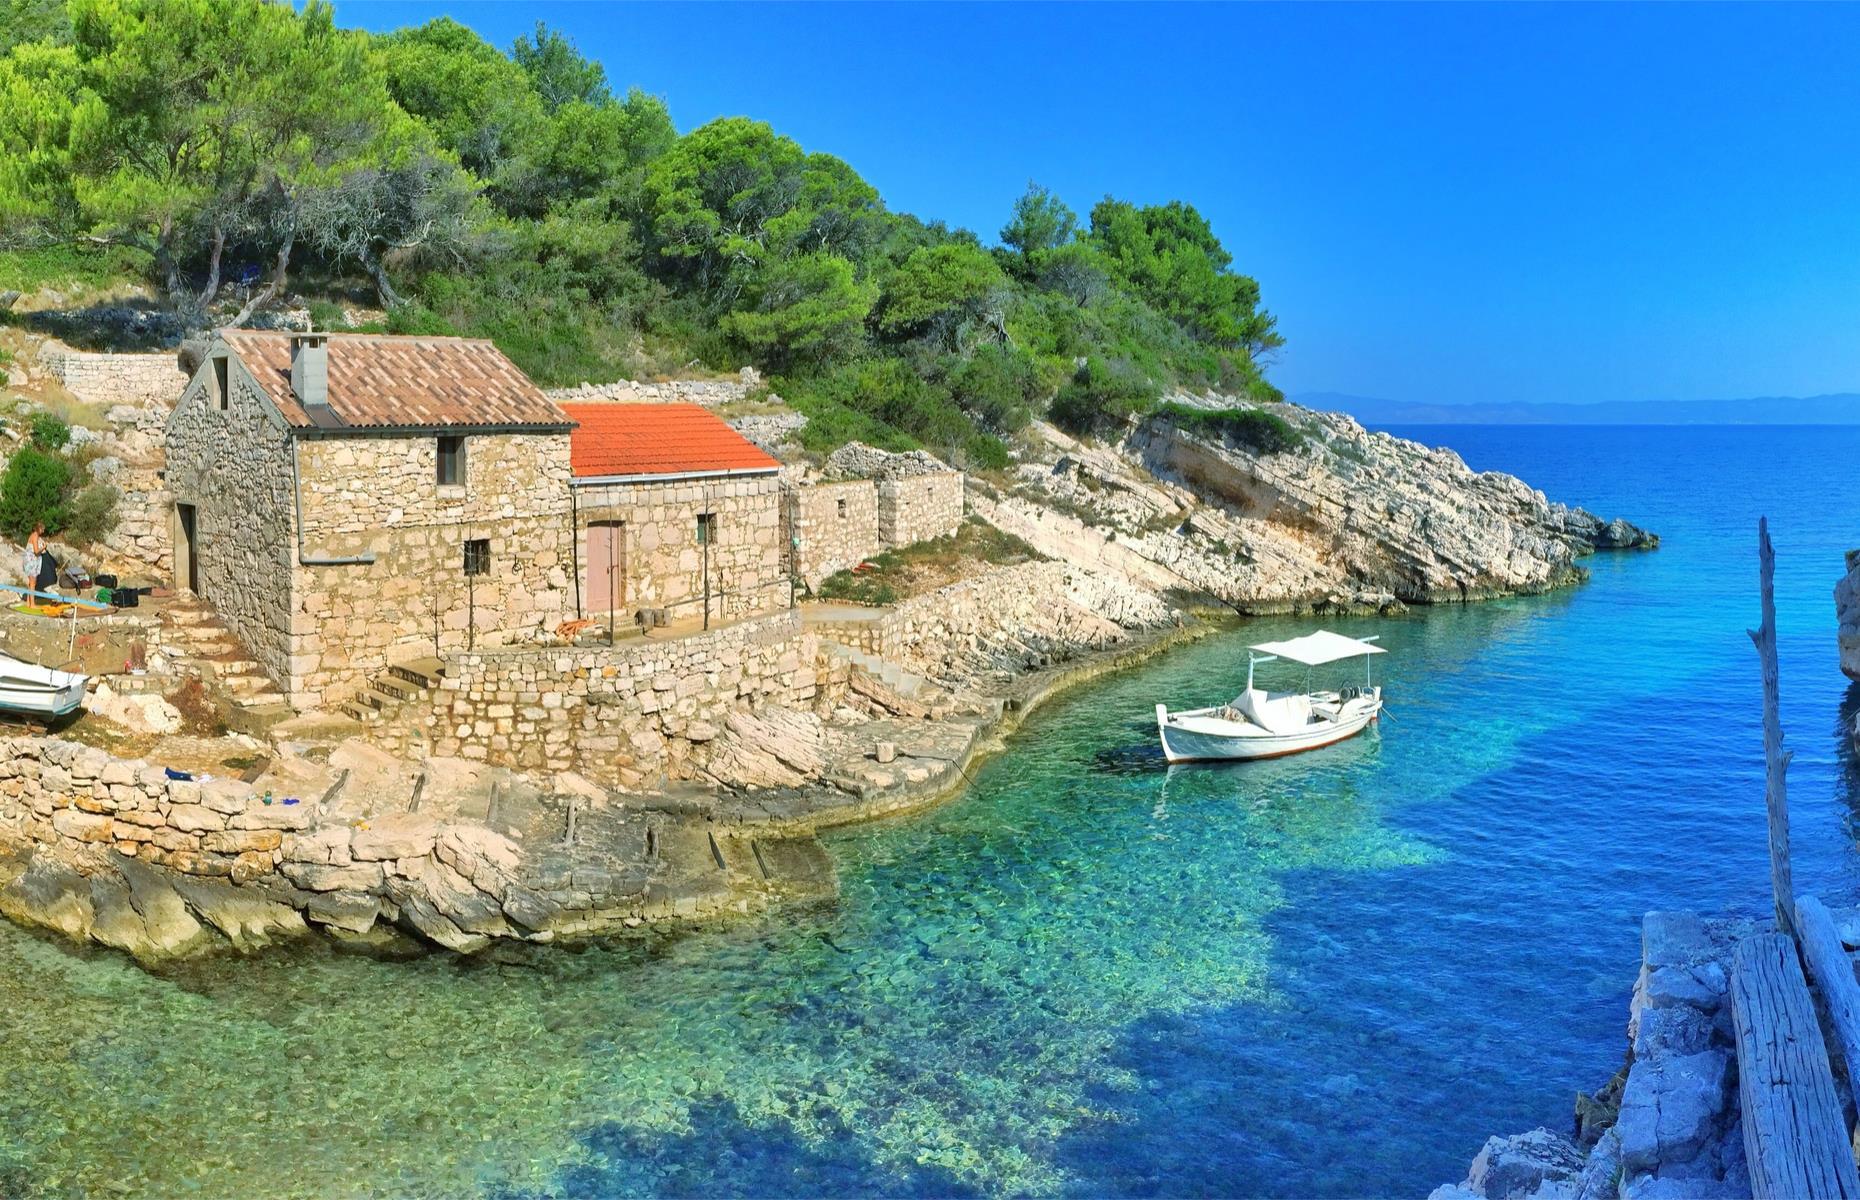 <p>The under-the-radar Lastovo archipelago is serviced by catamaran (three hours) and car ferry (four-and-a-quarter hours) from Split. Once you arrive in the port at Ubli, you can relax knowing that you're in for a week of unhurried life. You can charter a boat to sail around its 46 small islands or go diving and take a walk around its vineyards and pine forests. Matching the number of its uninhabited islets, Lastovo also has 46 fine little churches that are dotted around the sparsely populated isle.</p>